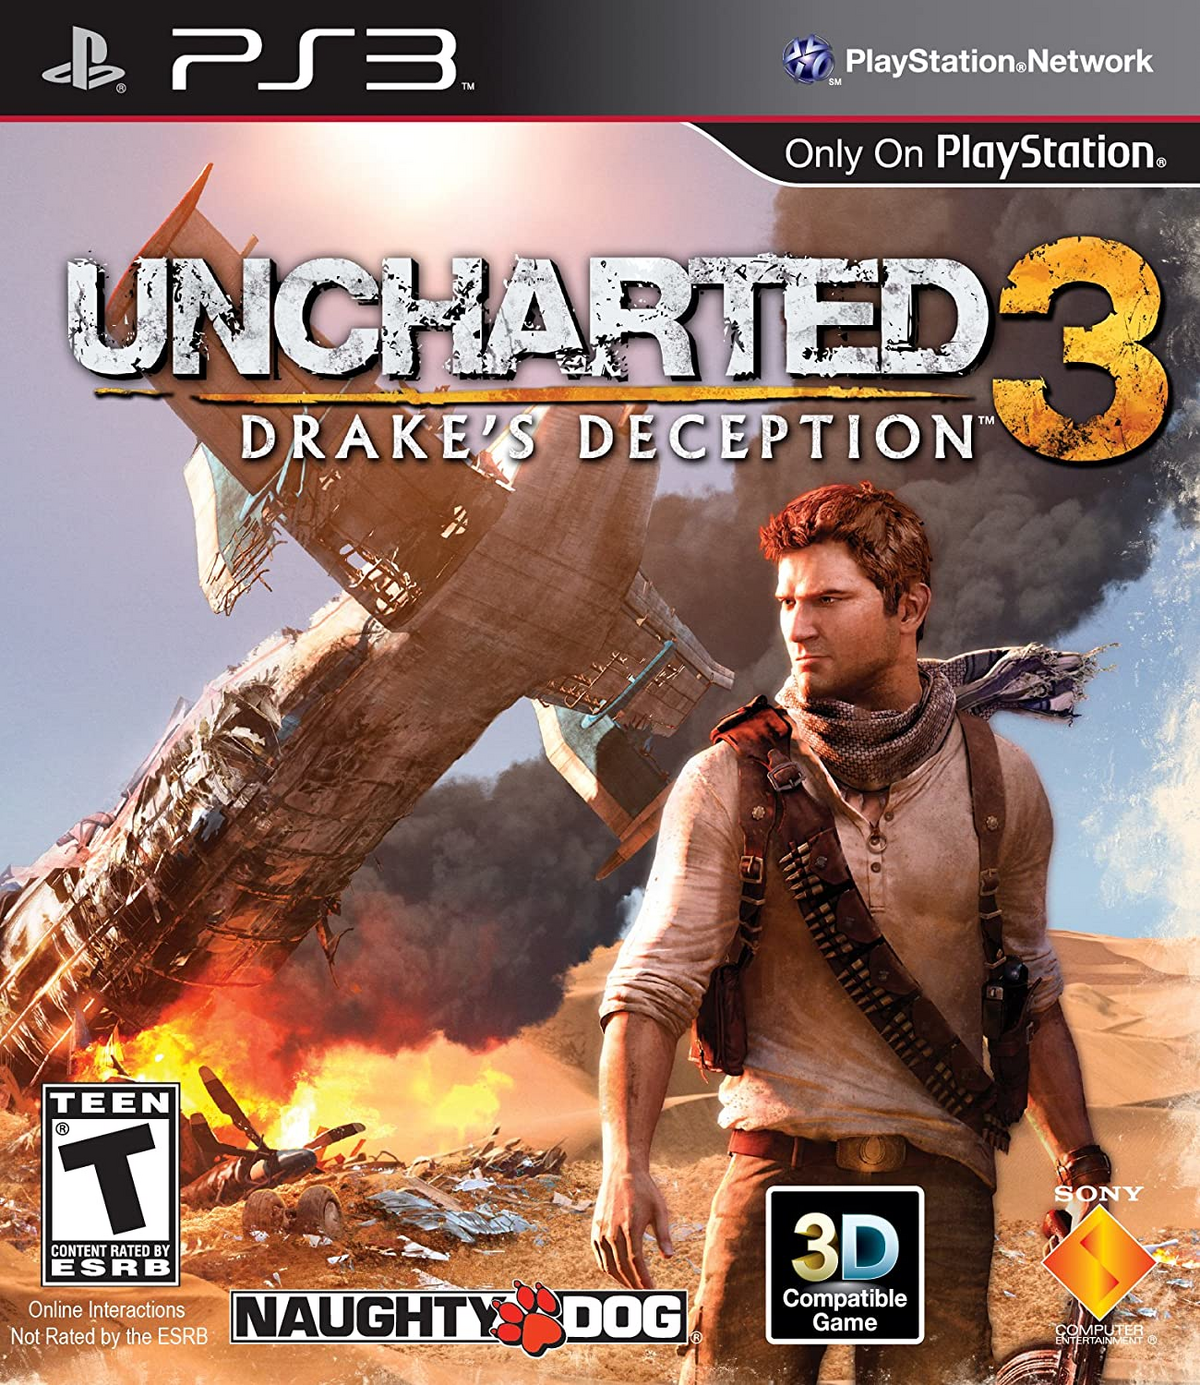 Uncharted 3: Drakes Deception] Platinum number 8. Now platinumed all of the  Nathan drake collection. This was probably my least favourite of the first 3  games, still great though. Looking to get